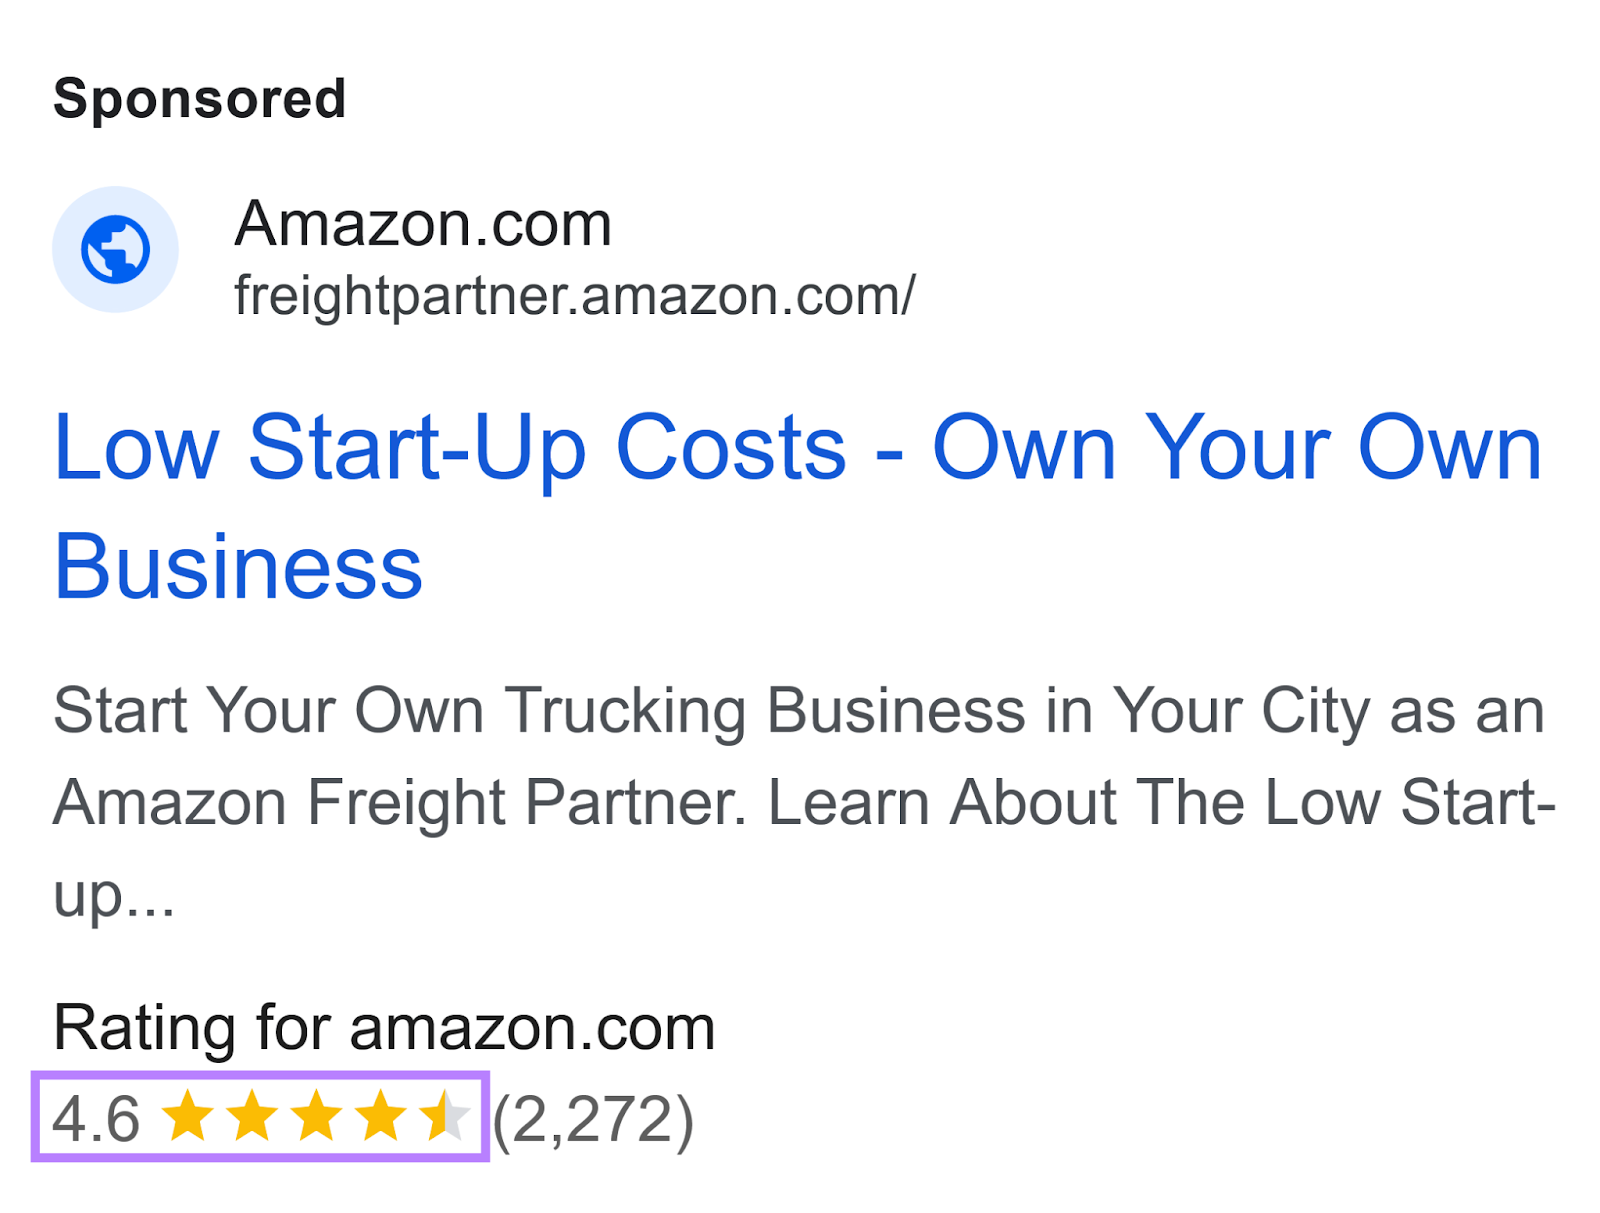 Amazon.com' ad on Google SERP with rating of 4.6 displayed